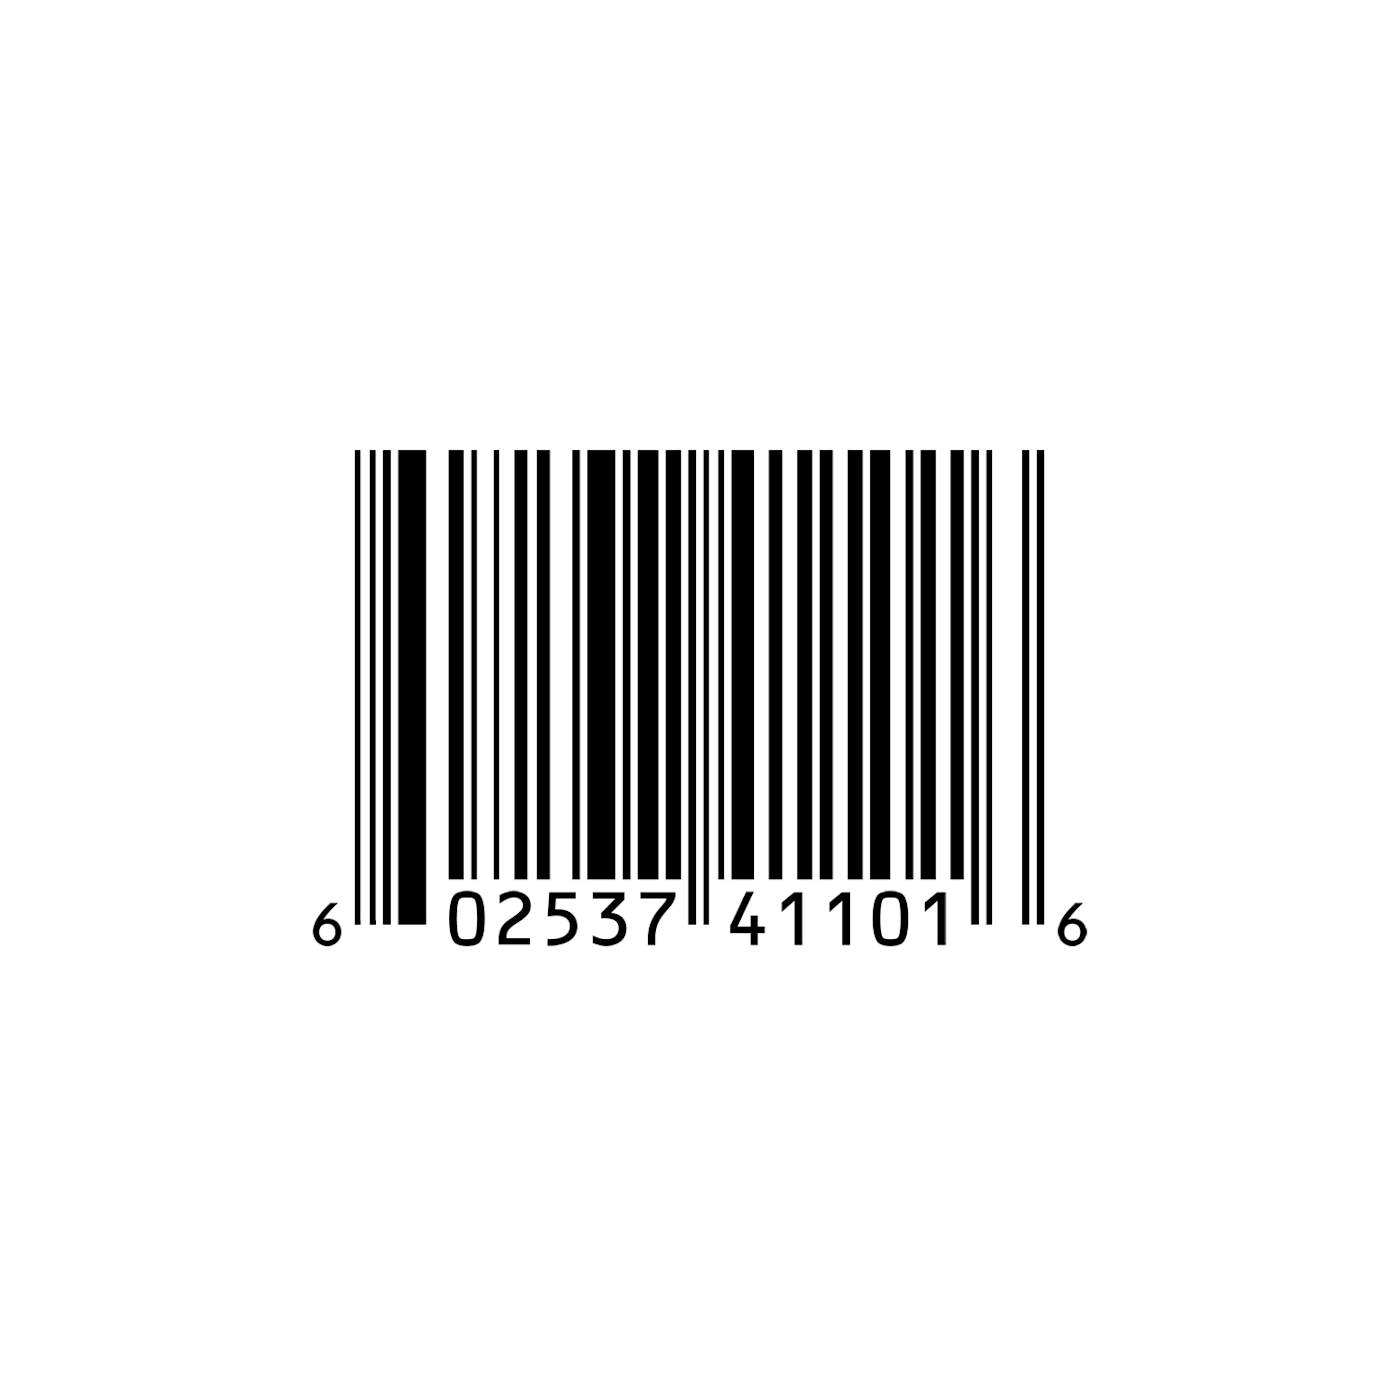 Pusha T MY NAME IS MY NAME CD